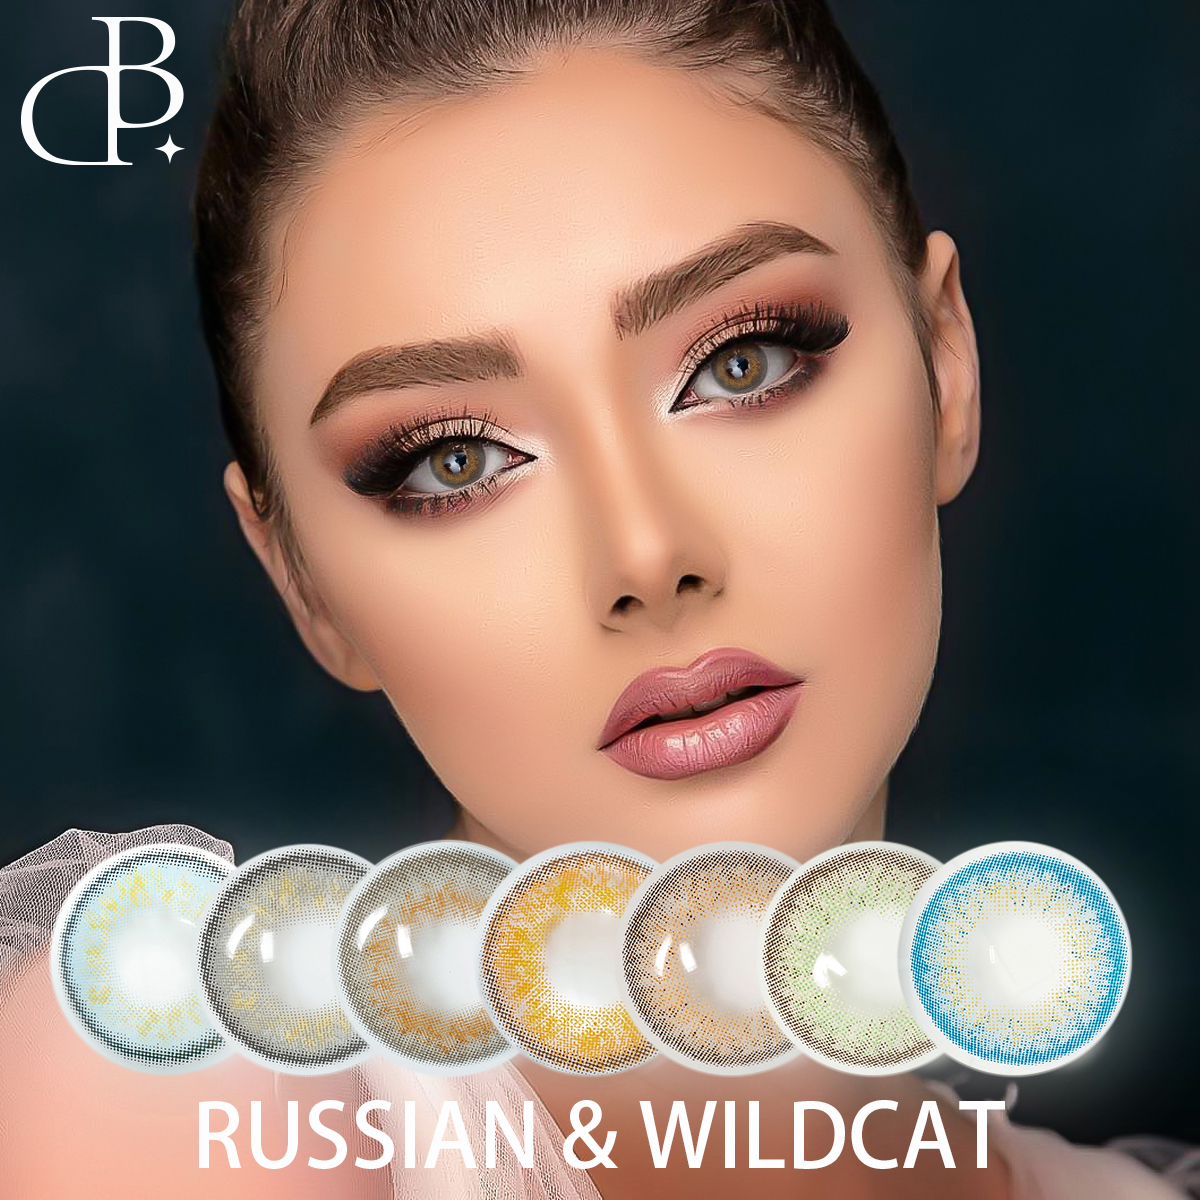 https://www.dblenses.com/russianwild-cat-natural-colored-eye-lenses-wholesale-soft-colored-contact-lenses-rescription-contact-lenses-free-shipment-product/